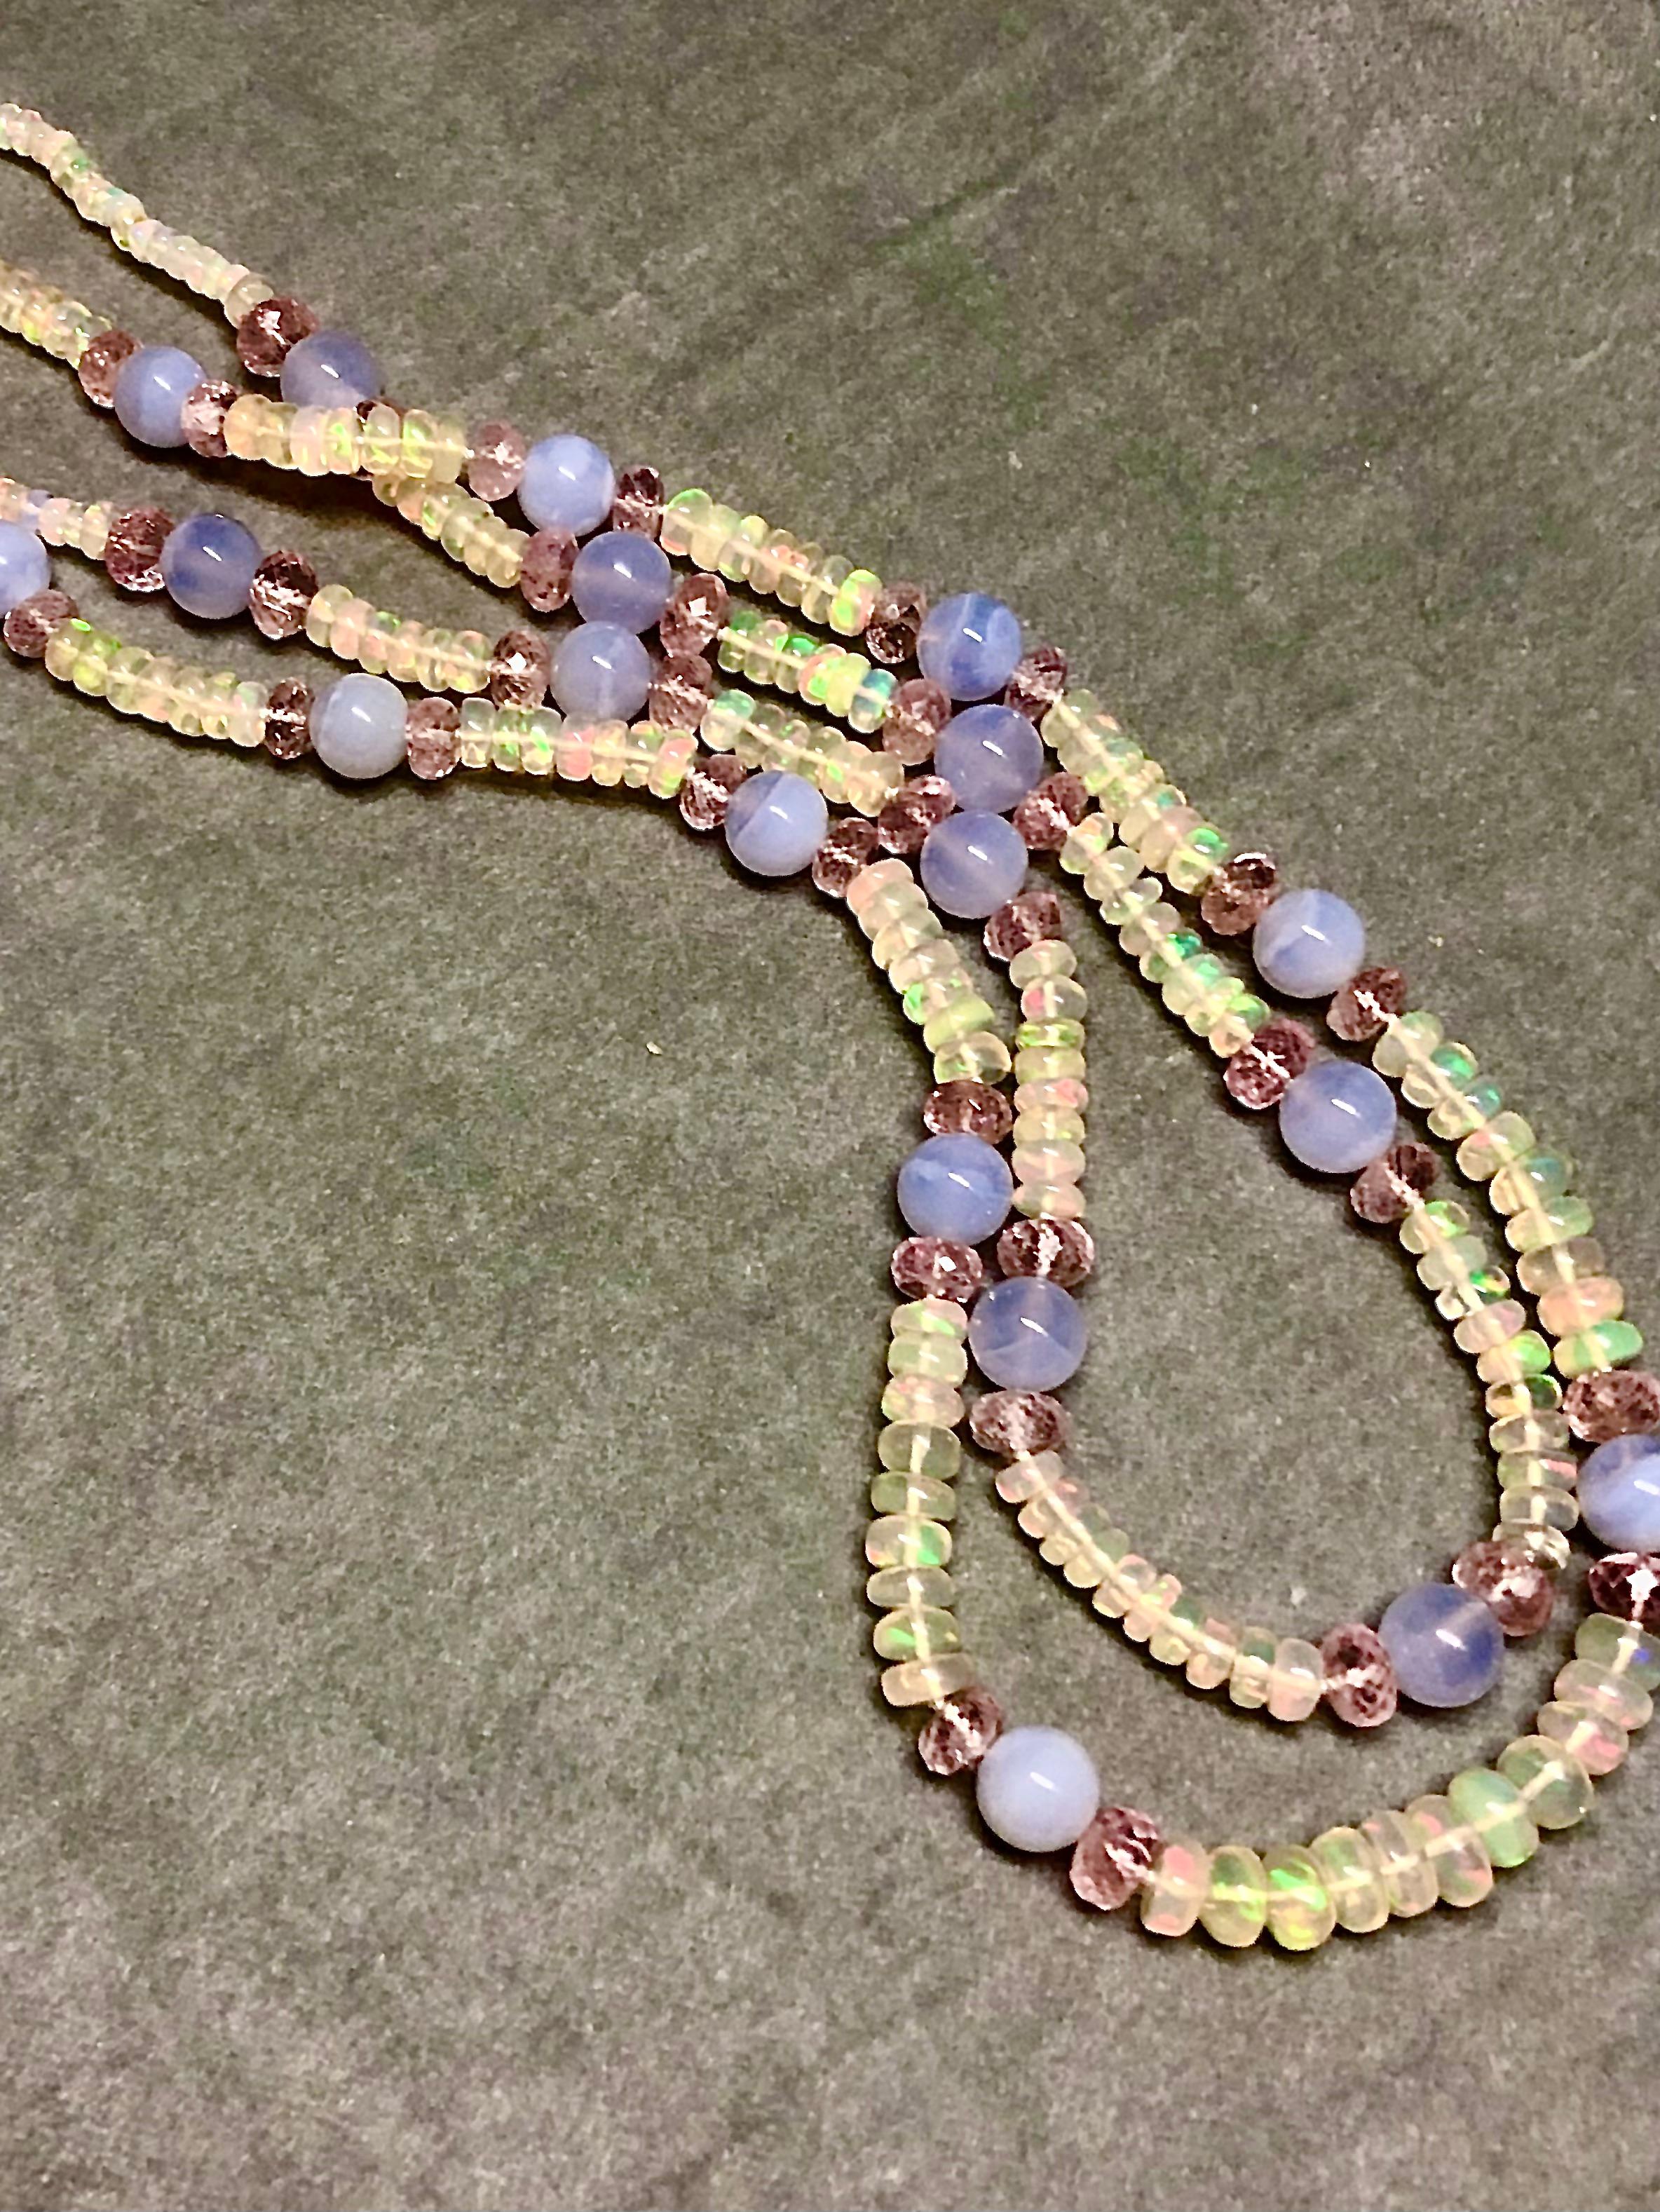 Fine chalcedony blue/grey beads flanked by raspberry tinted morganite rondelles floating like planets between mesmerizingly iridescent Ethiopian opal rondelles in this double strand necklace finished with a 14kt white gold ball clasp. This piece is